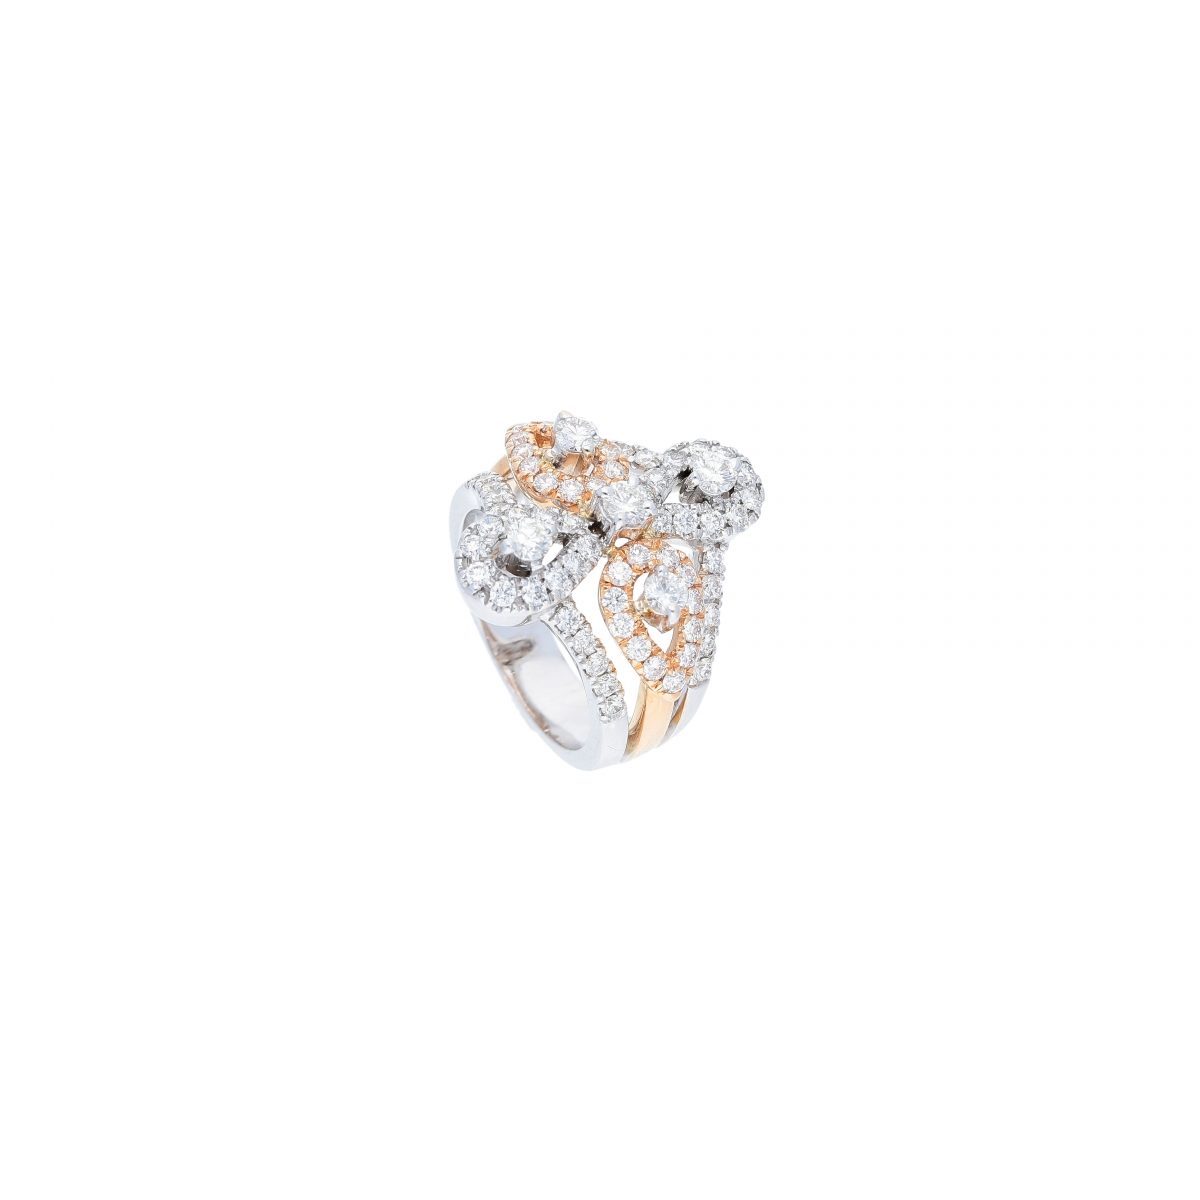 Idylle Blossom Ring, White Gold And Diamonds - Categories